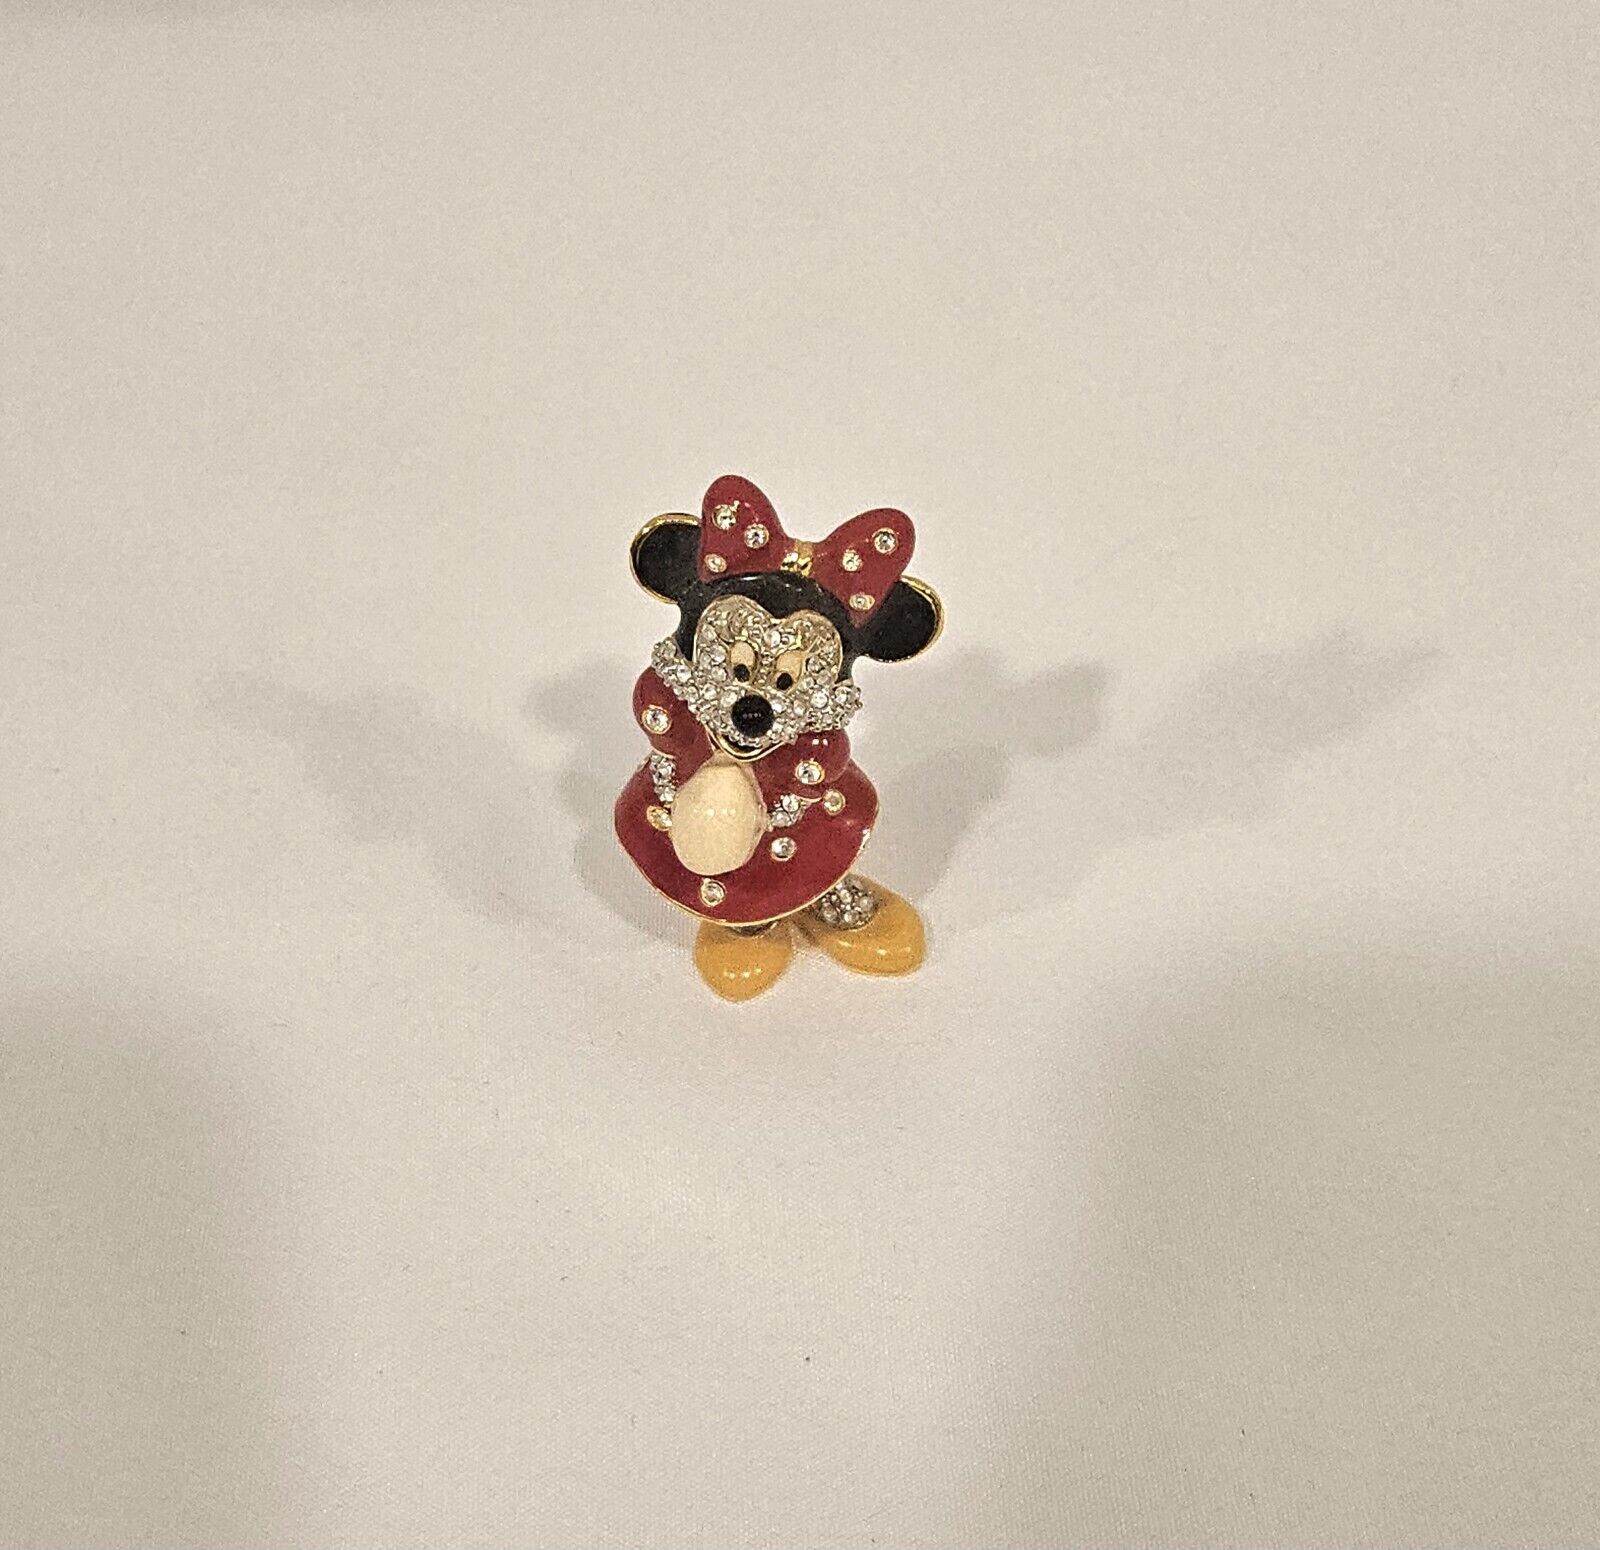 Rare Minnie Mouse Disney Swarovski Crystals By Arribas Brothers Limited Small